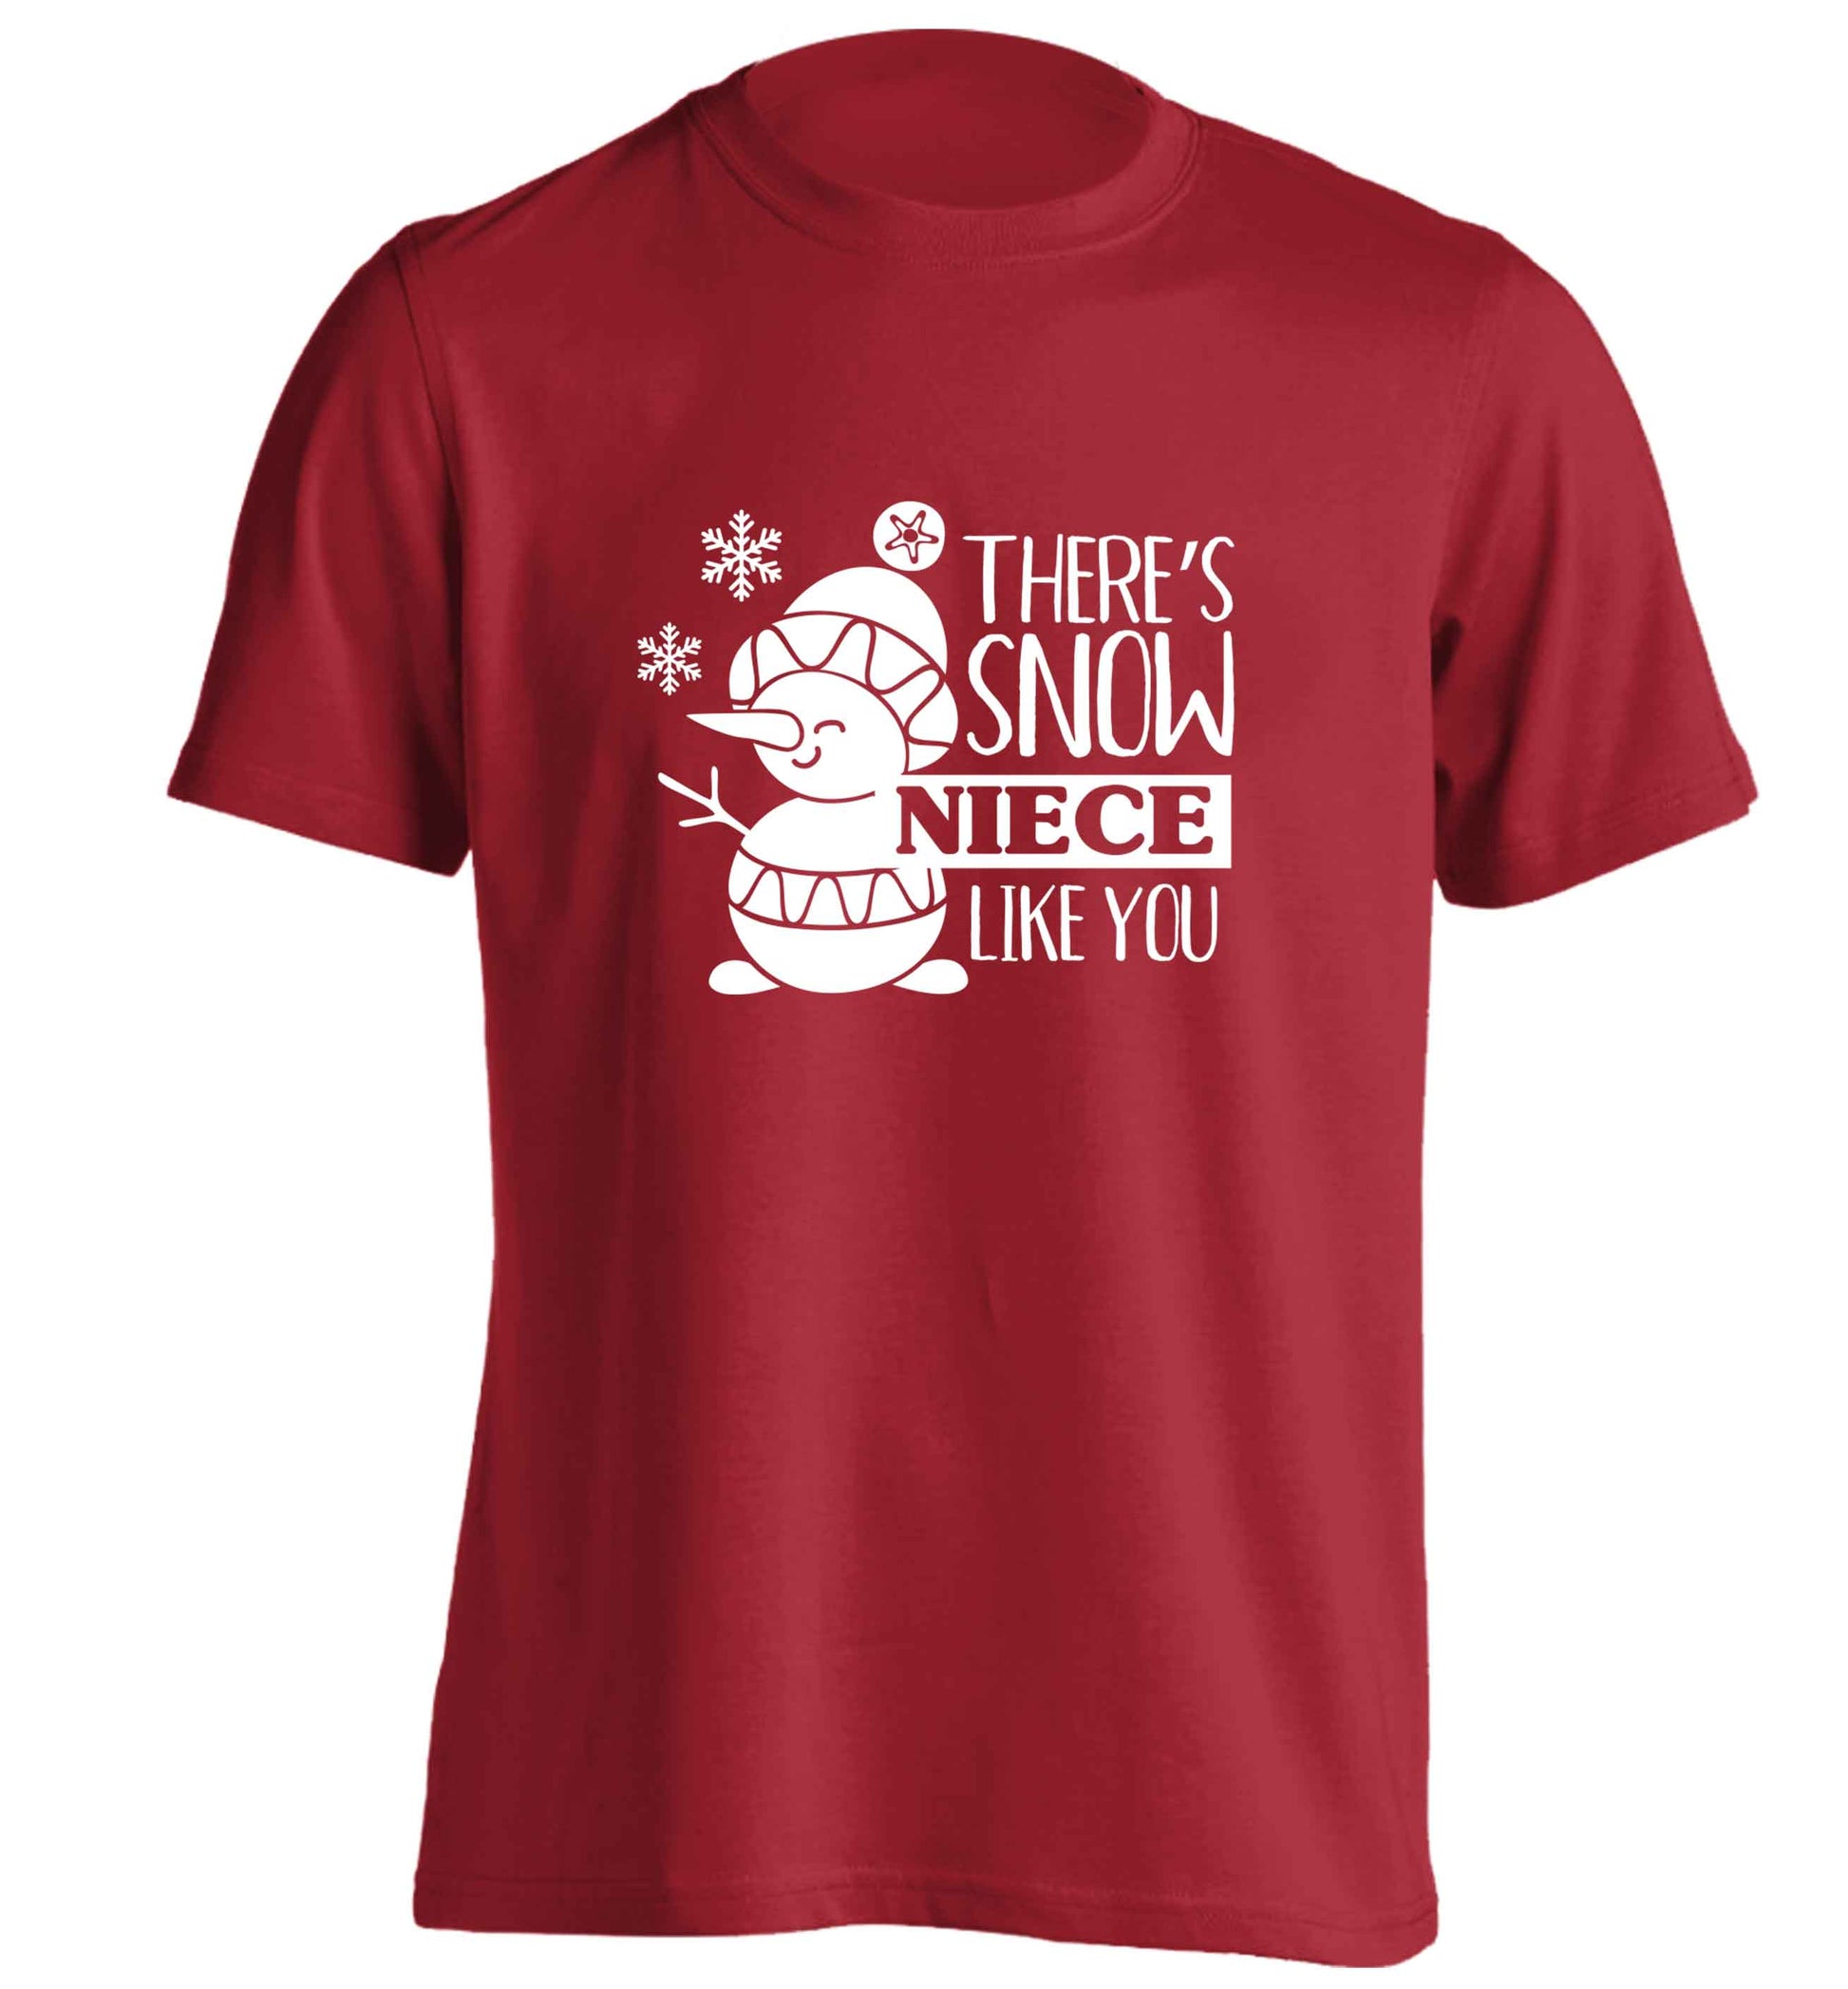 There's snow niece like you adults unisex red Tshirt 2XL